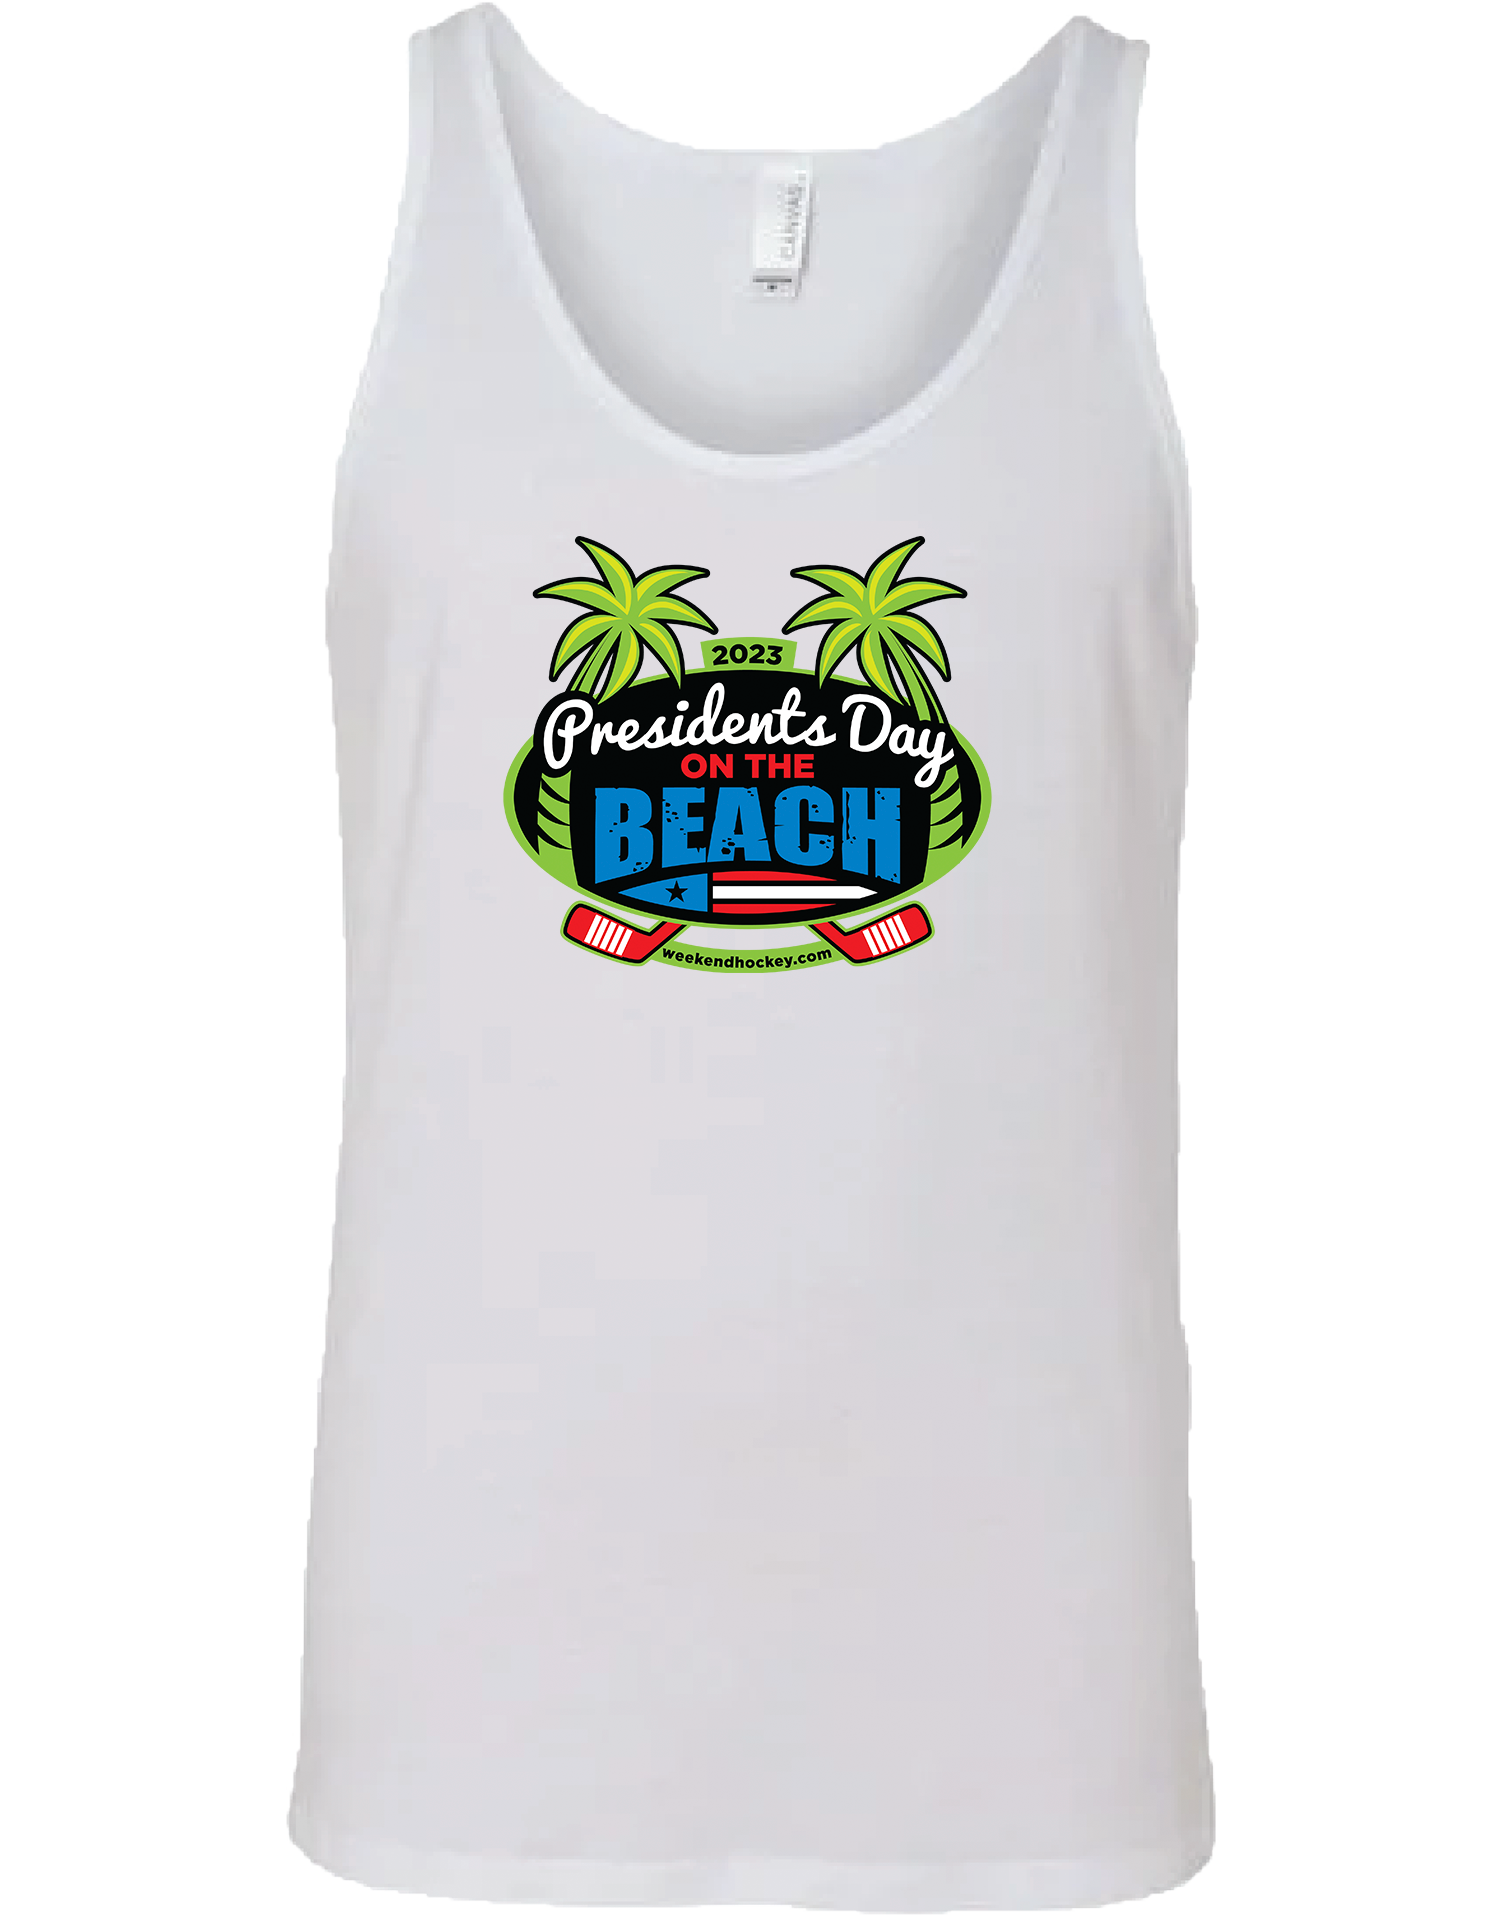 TANK TOP - 2023 Presidents Day on the Beach